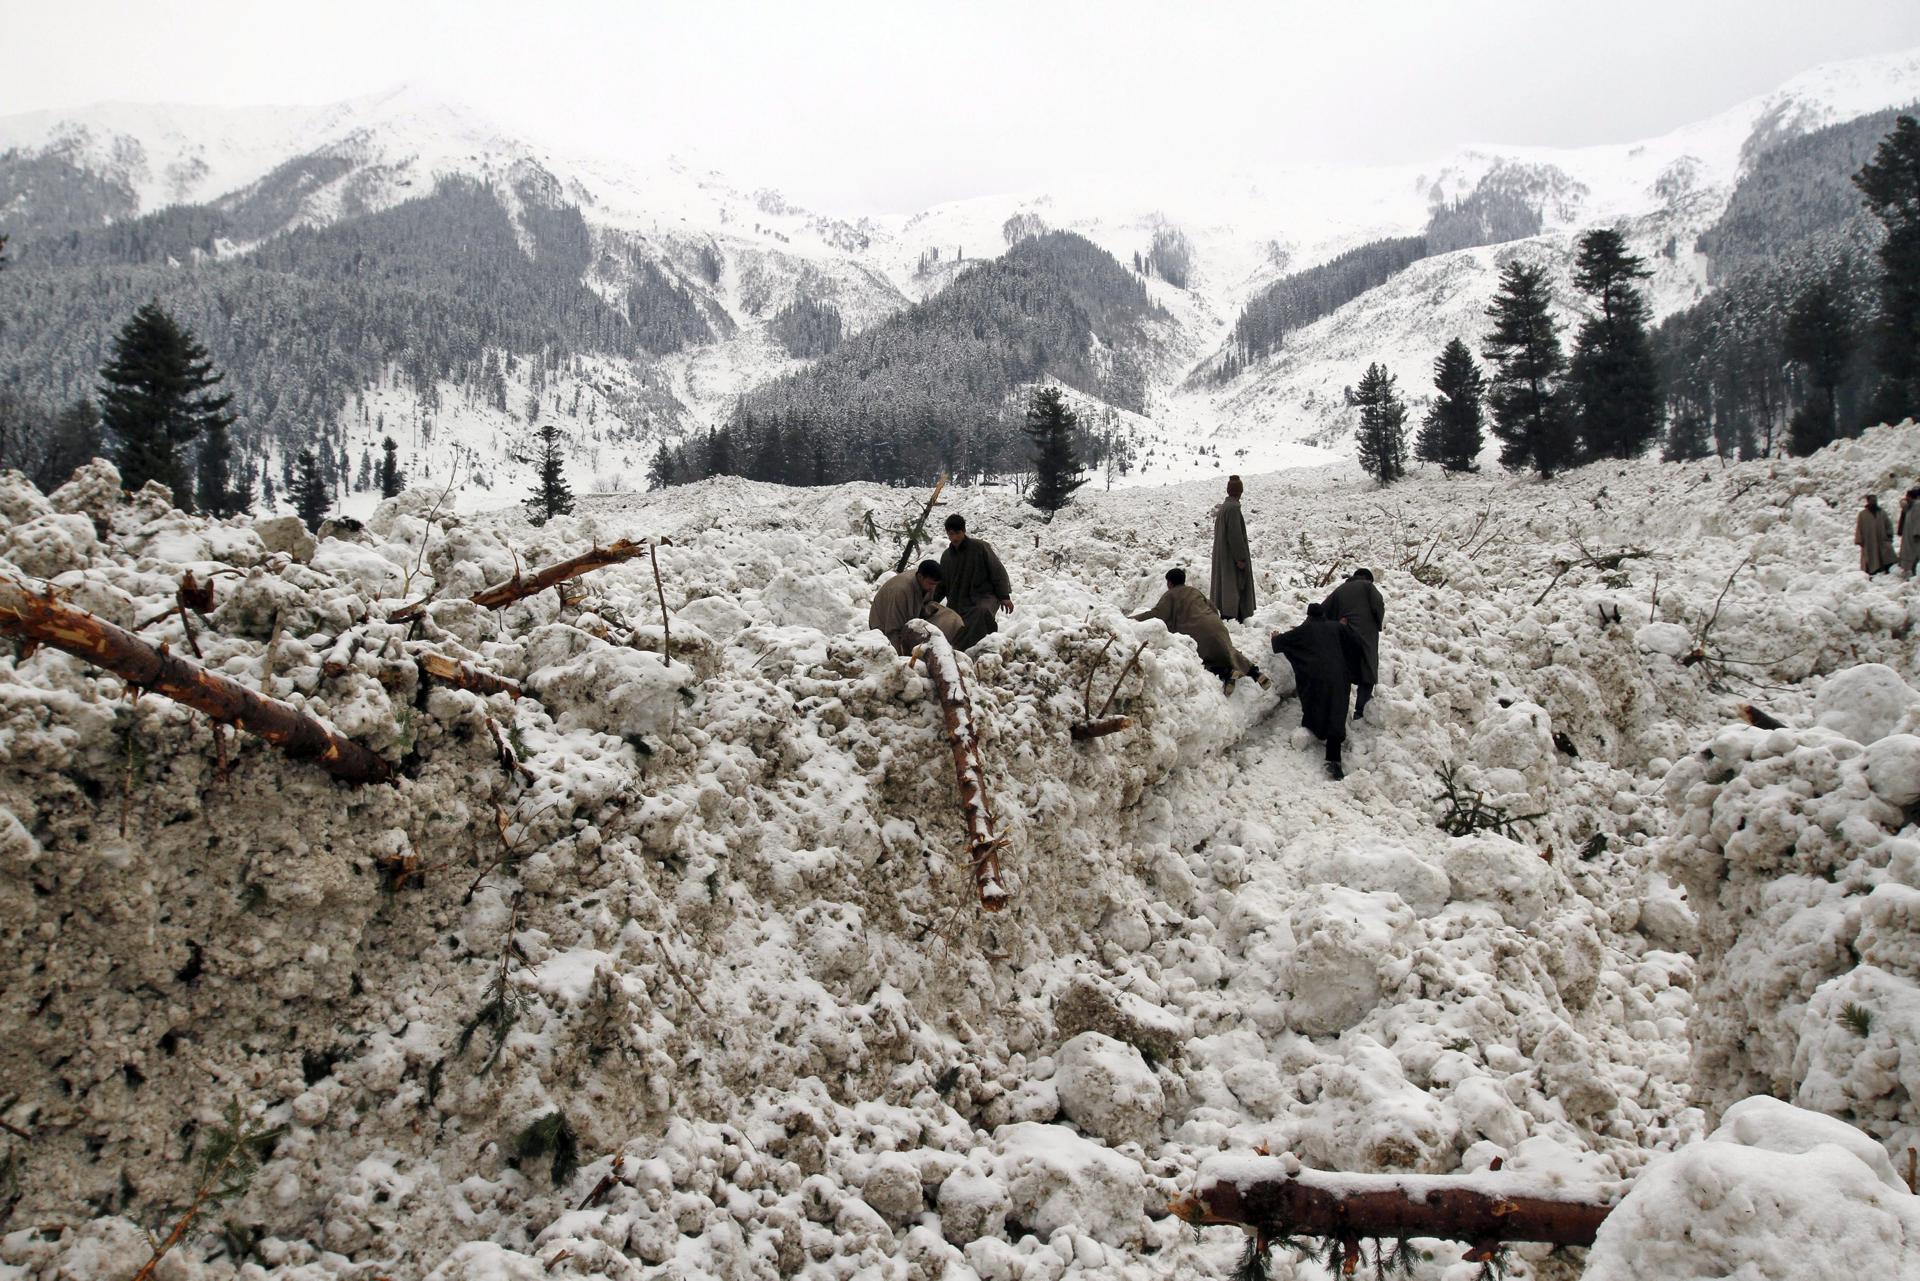 Villagers search for their belongings after their huts were buried under snow due to avalanche in Ramwari, 70 km from Srinagar, the summer capiat of Indian Kashmir, 23 February 2012. EPA/FILE/FAROOQ KHAN